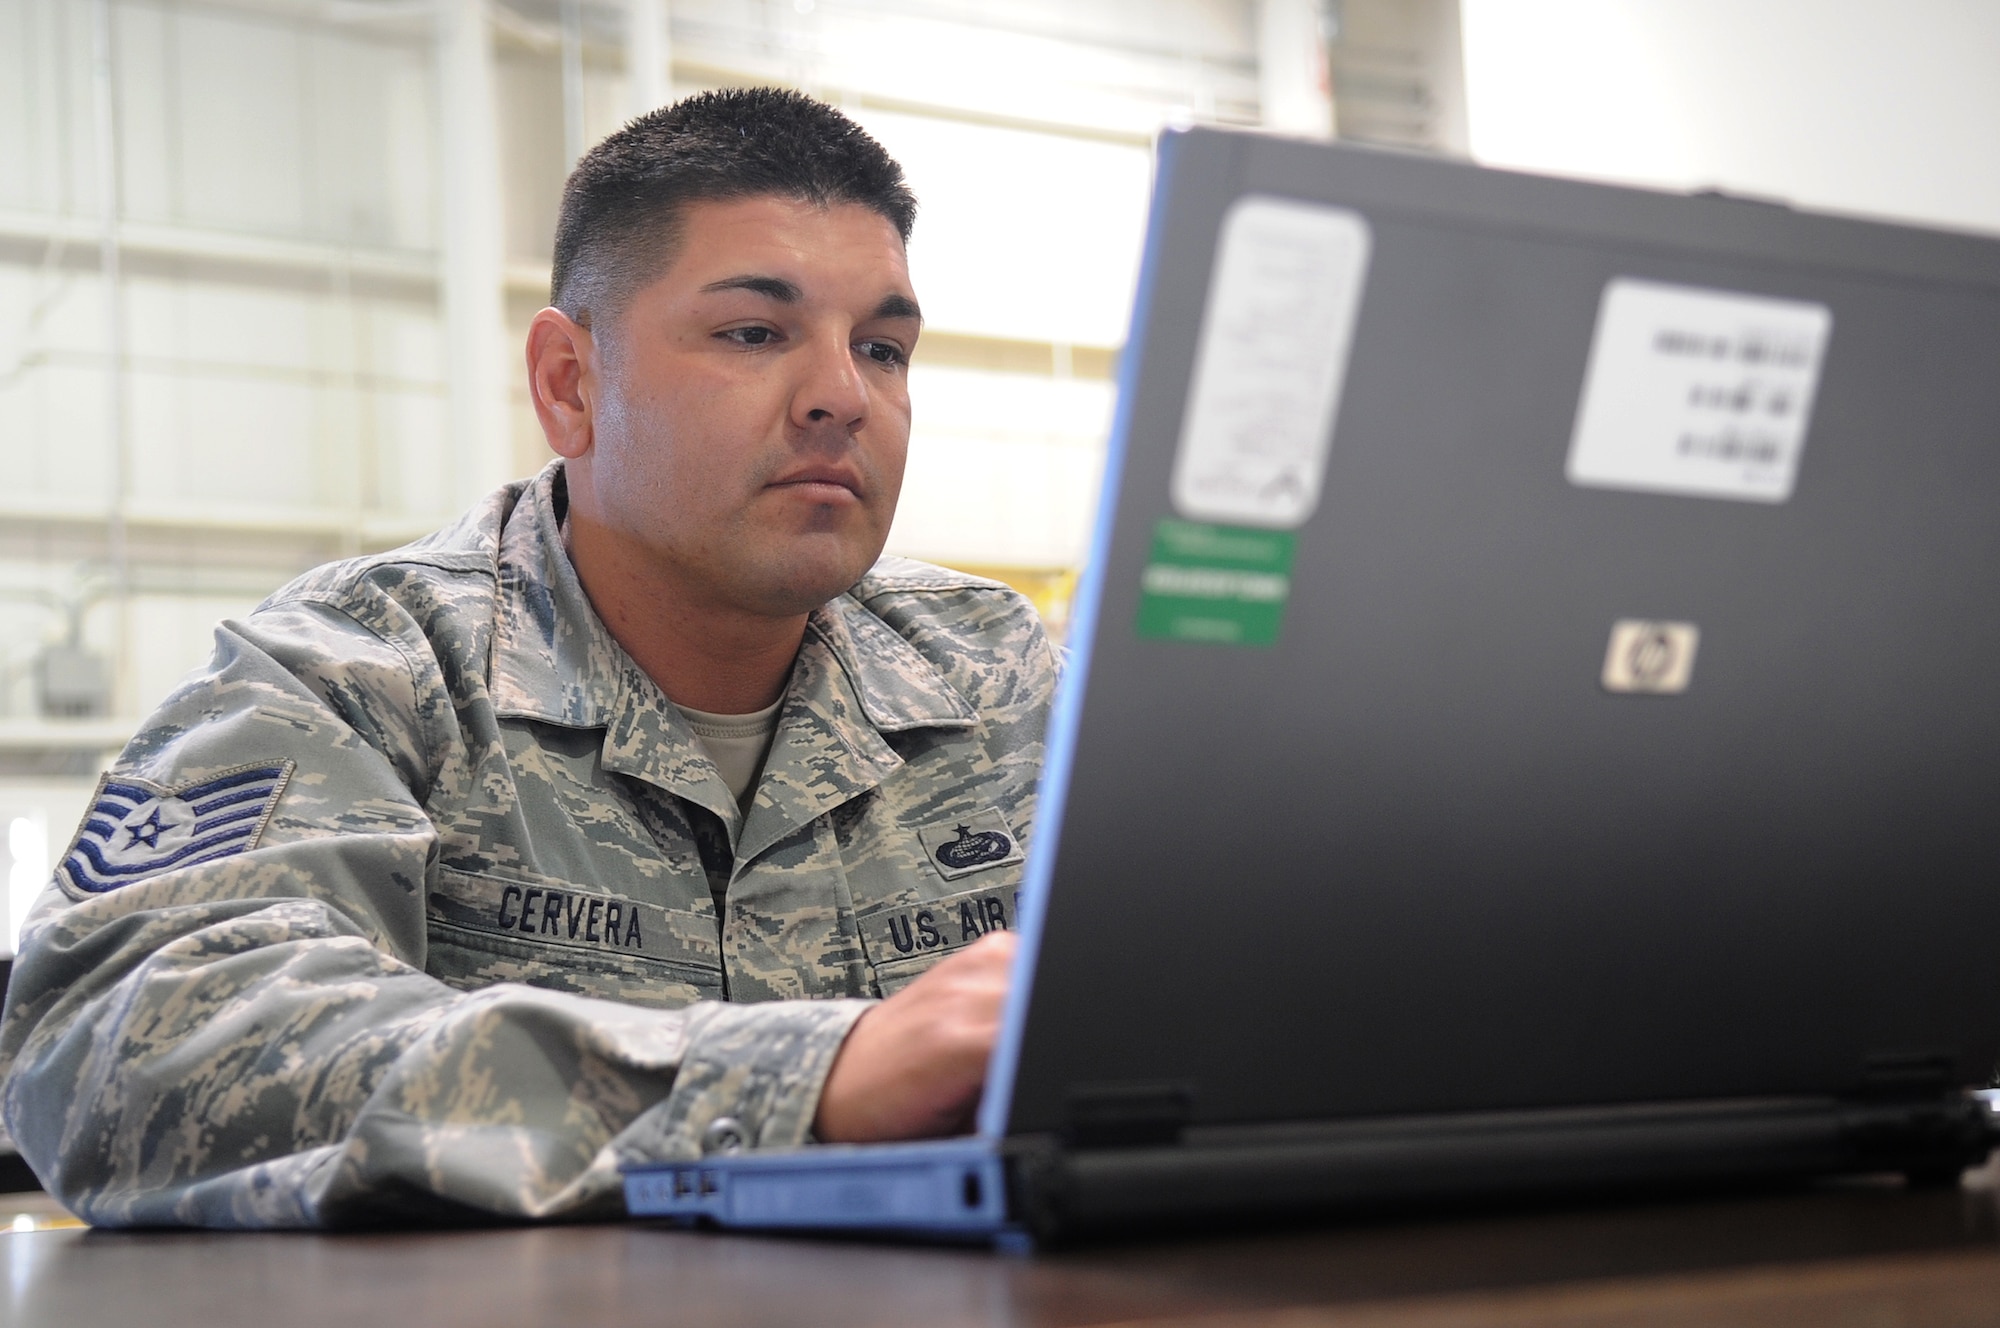 BUCKLEY AIR FORCE BASE, Colo.-- TSgt Ronald Cervera from the 460th Force Support Squadron, helps the personnel processing line for Operation Pacific Passage March 23, 2011. The processing line was set up at Denver International Airport Joint Reception Coordination Center. (U.S. Air Force photo by Airman Manisha Vasquez)